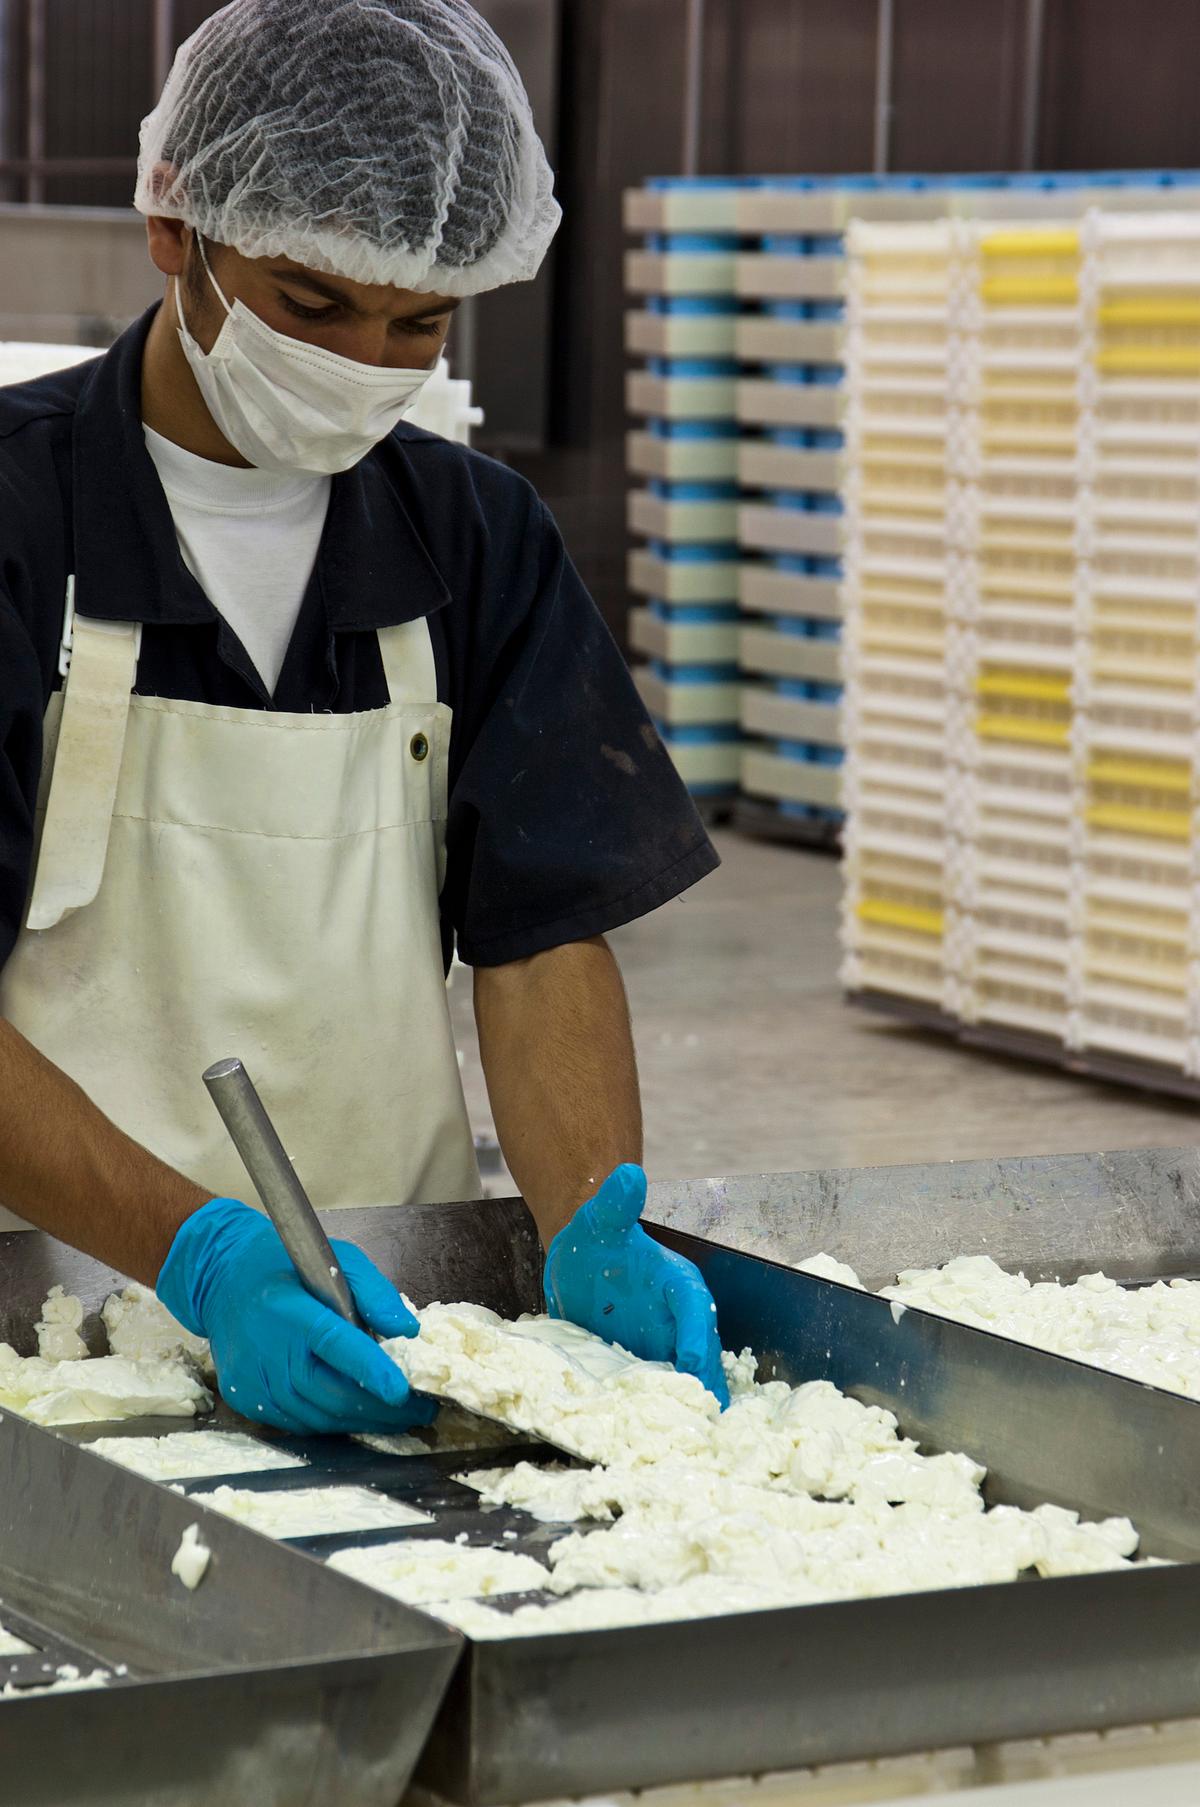 At the <a href="https://www.roussas.gr/">Roussas Dairy</a>, the family has been making traditional Greek feta the same way since the 1950s. (Courtesy of Odysea)